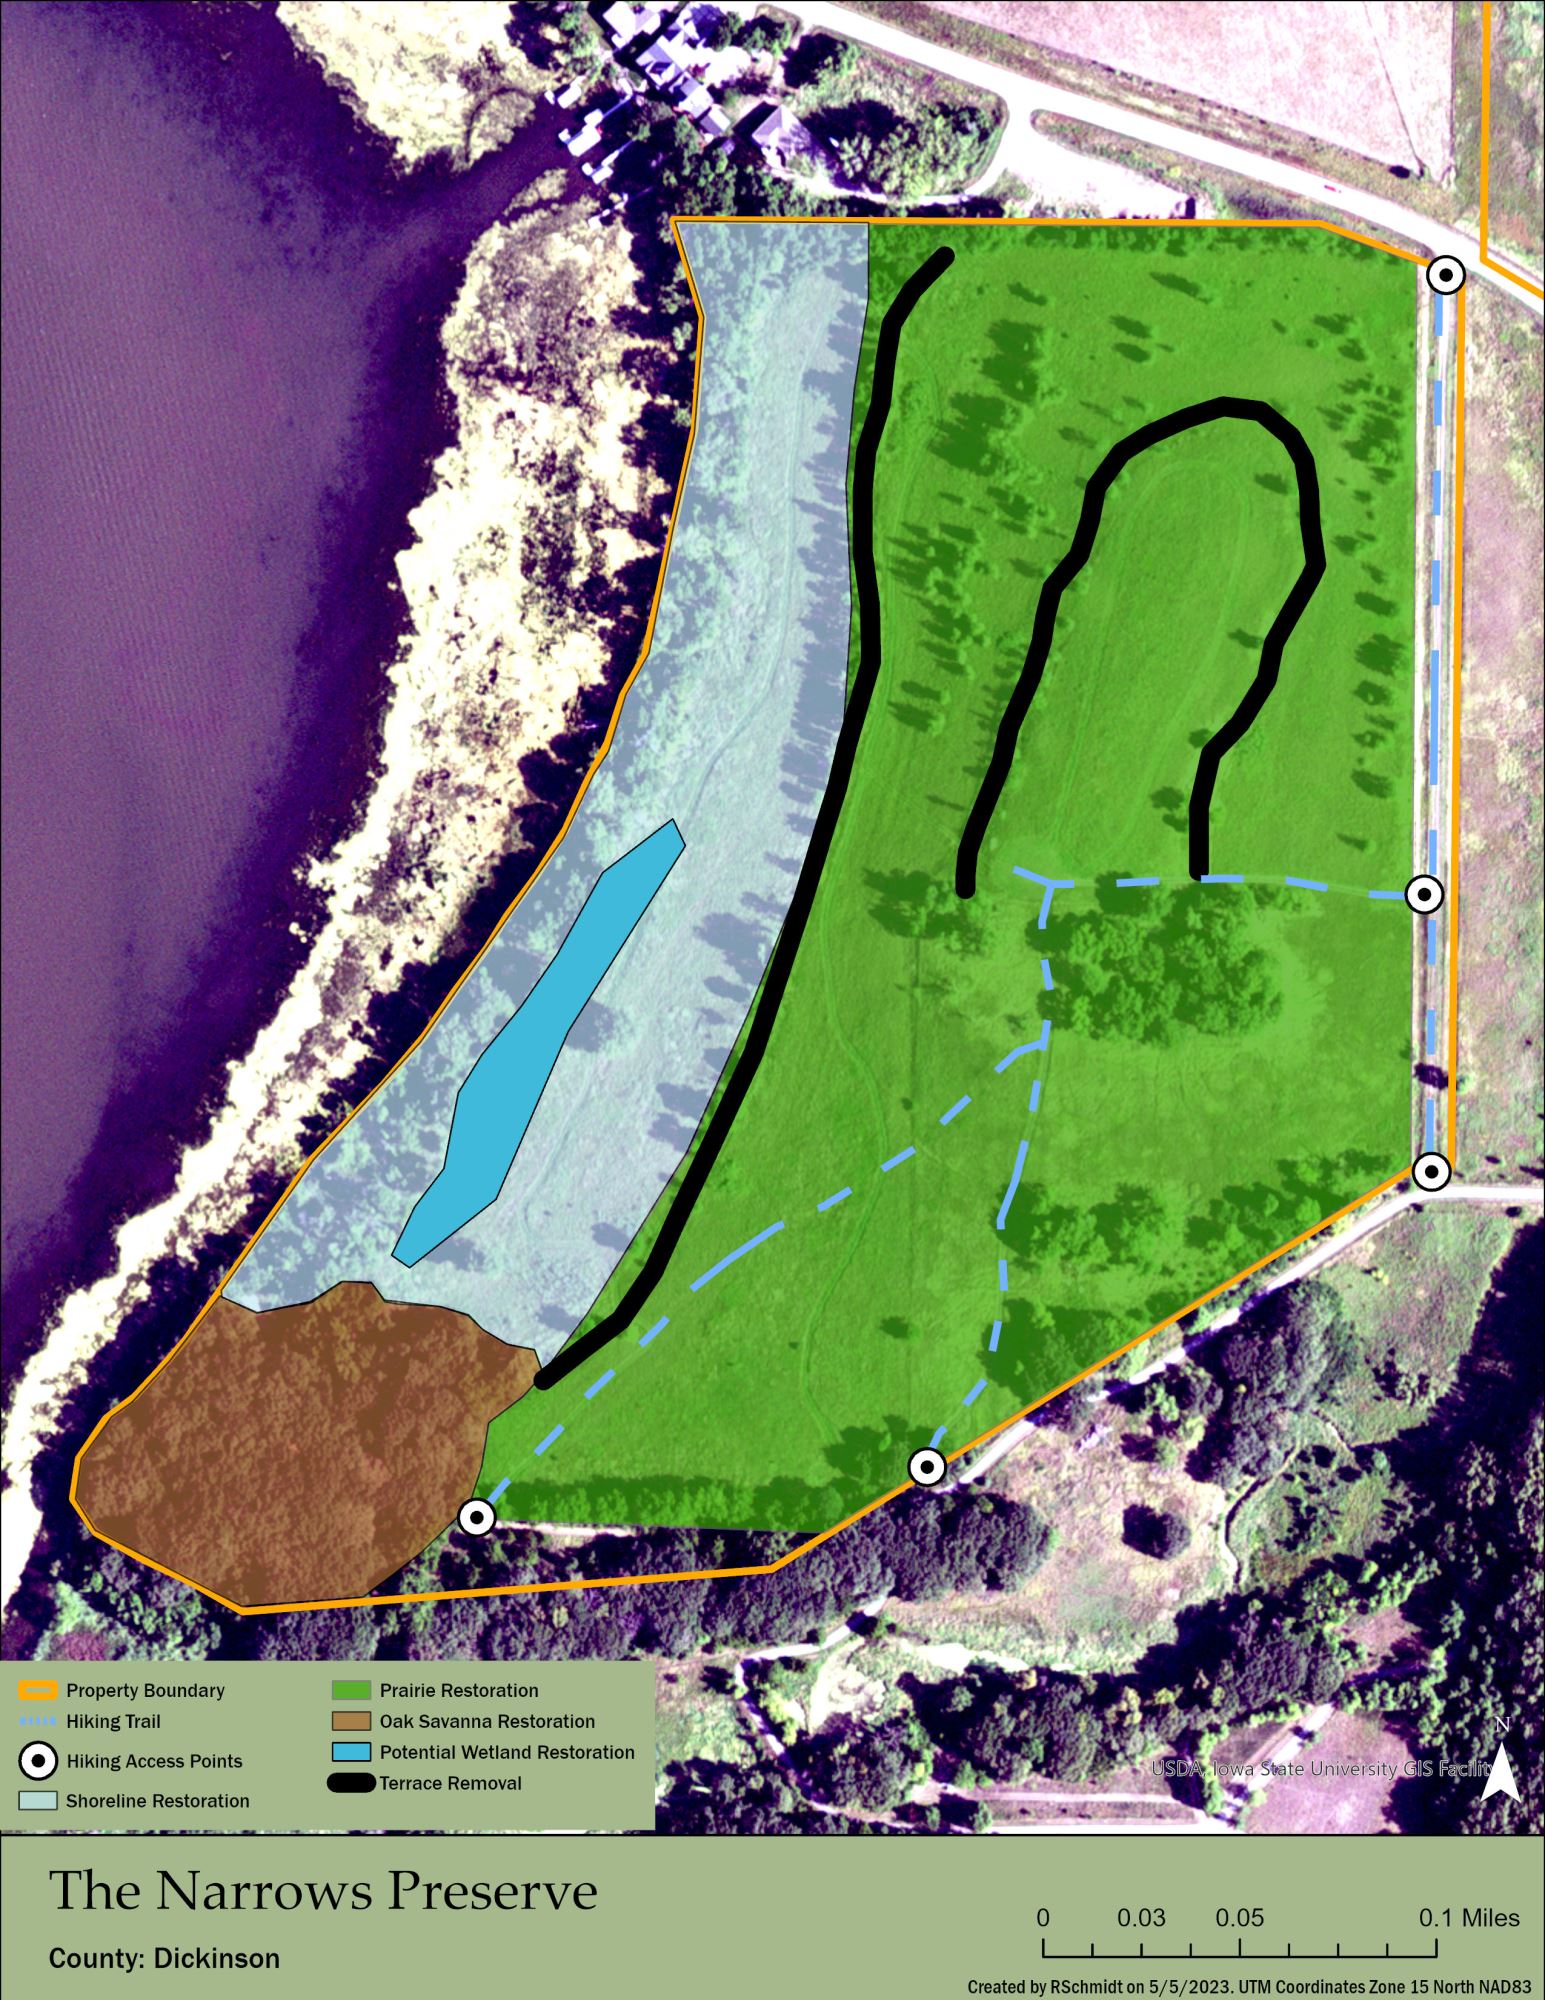 Map showing where different management work will be done at The Narrows Preserve